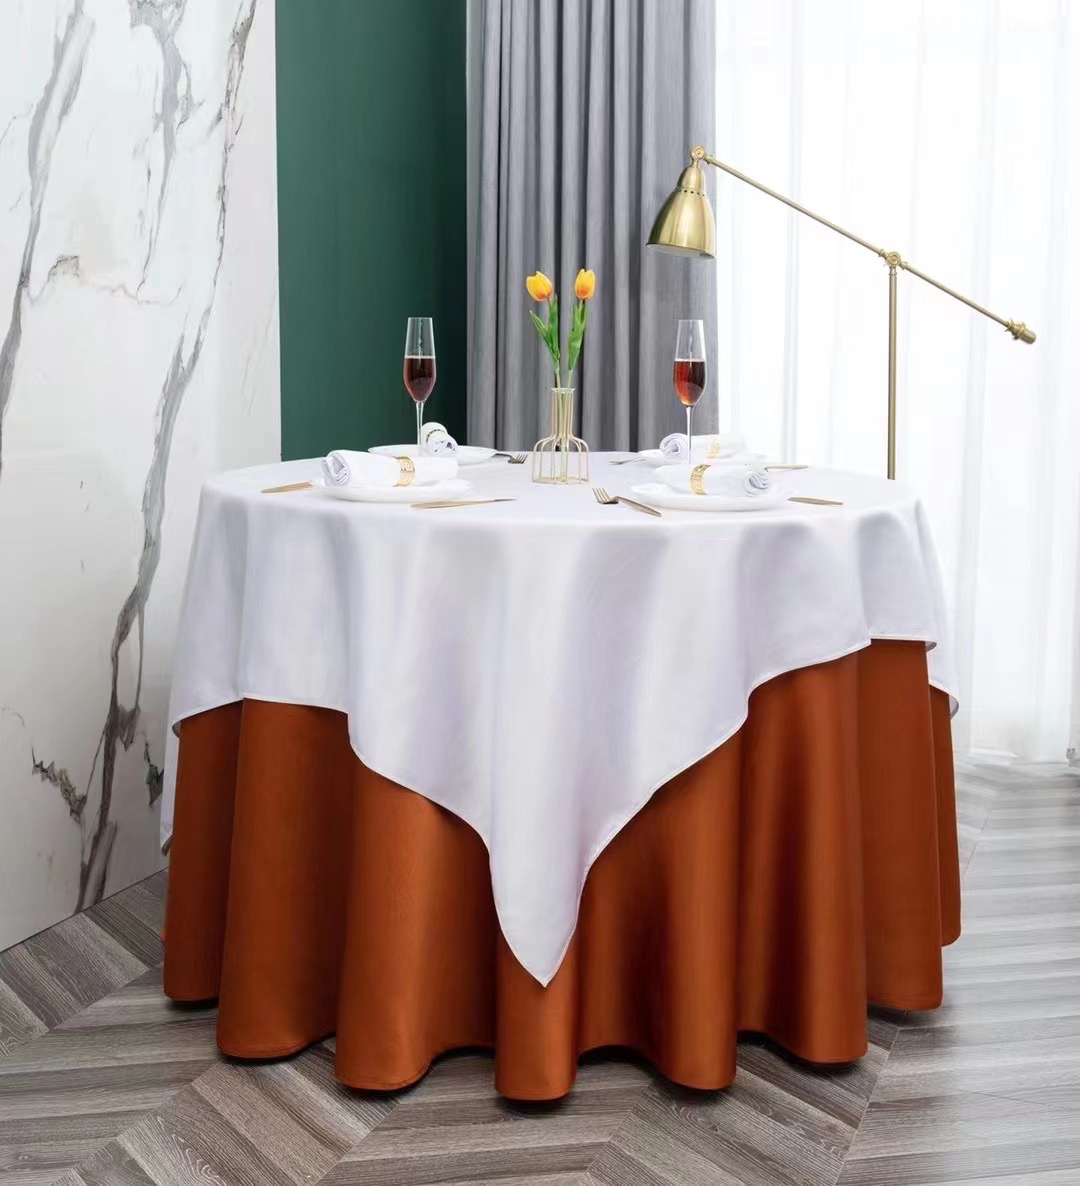 Nicefoto Hotel Supplies Hotel Tablecloth High-End Hotel Tablecloth